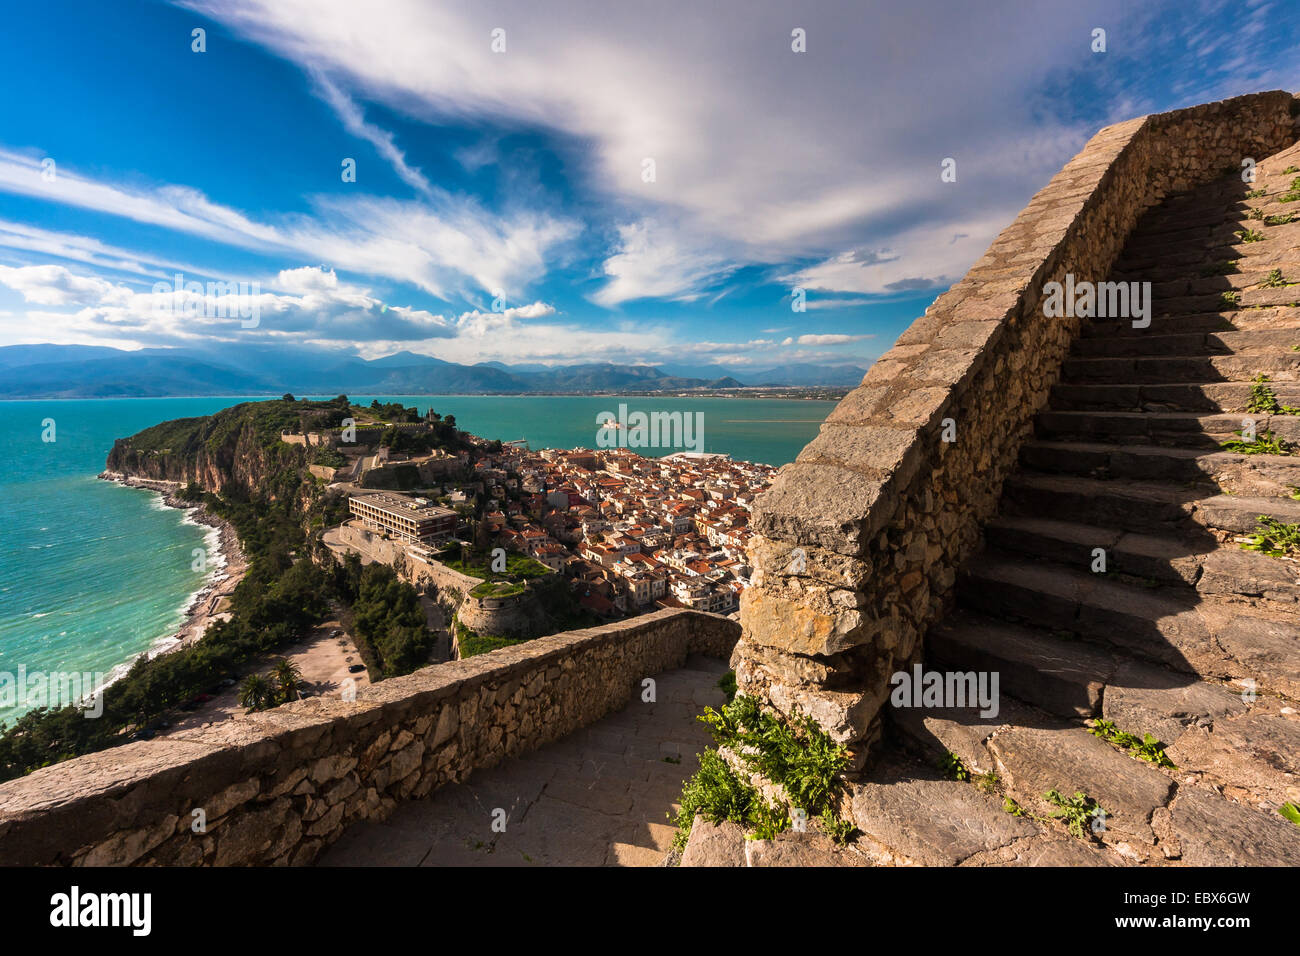 The city of Nafplion in southern Greece and the stairway to the old castle. Stock Photo